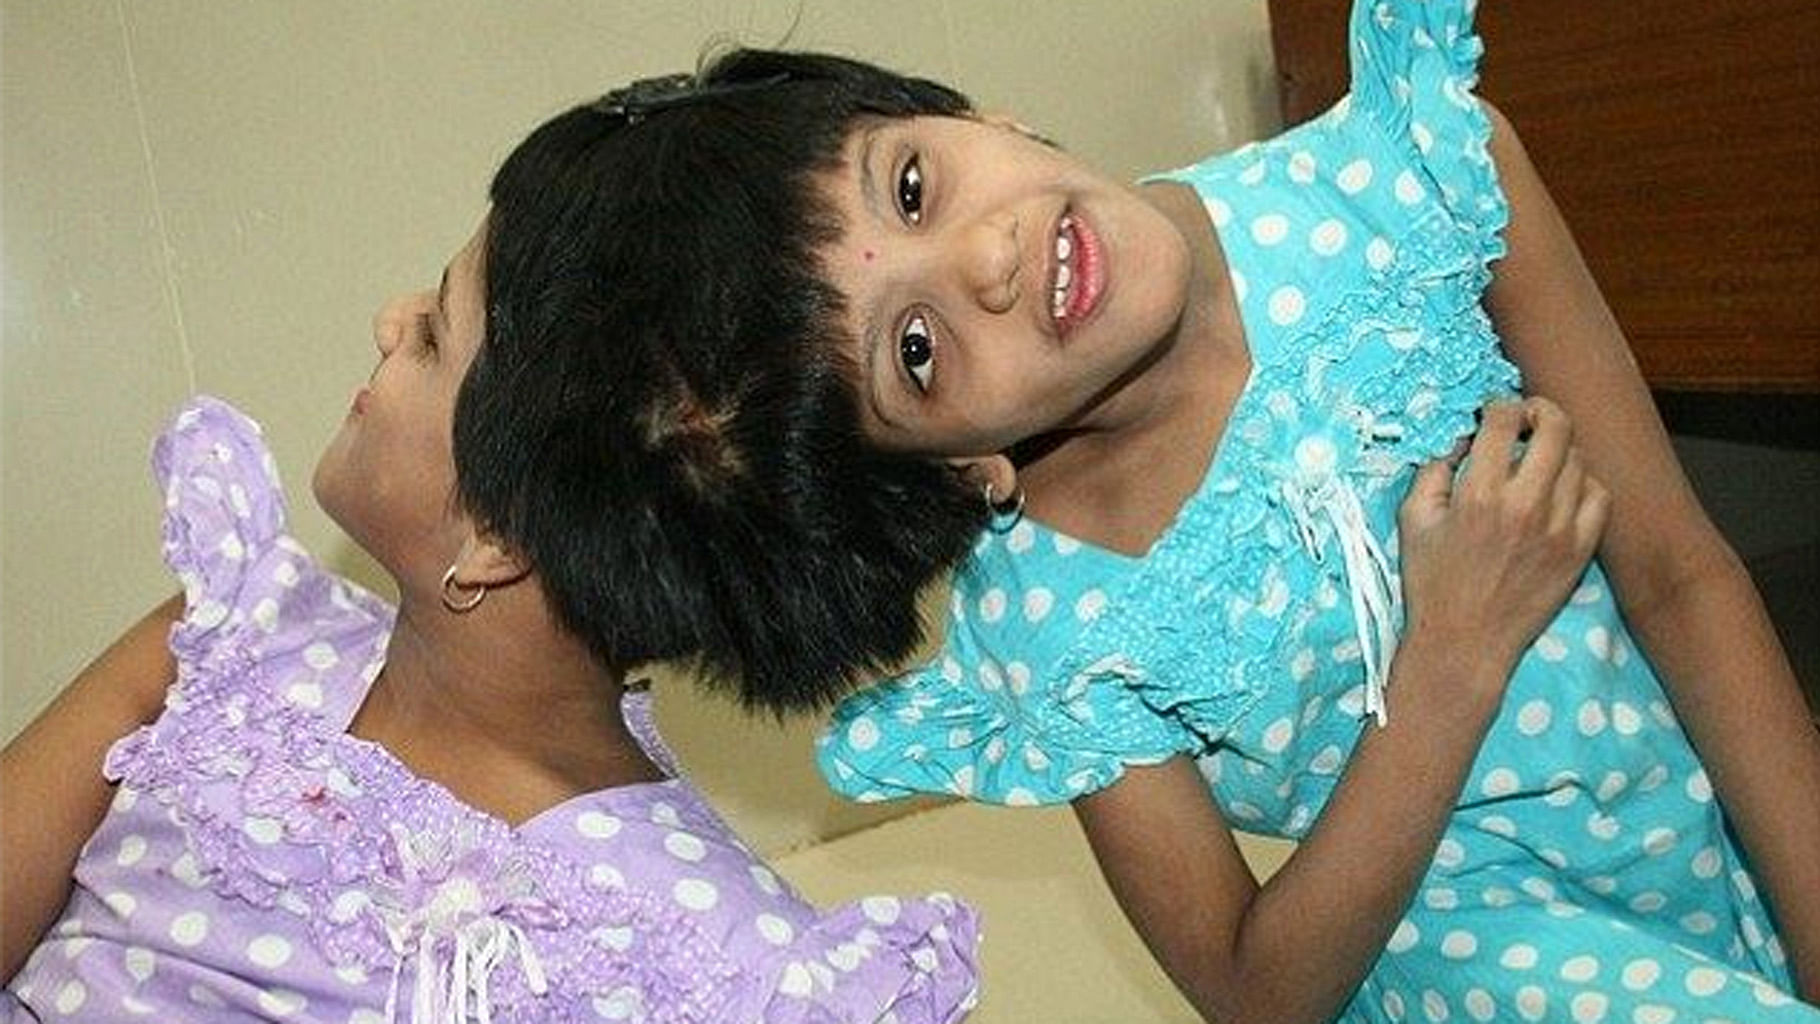 13-year-old conjoined twins Veena and Vani. (Courtesy: Facebook/ <a href="https://www.facebook.com/Veenavanitwins/photos/a.1427912737430863.1073741825.1427911764097627/1427912750764195/?type=3&amp;theater">VEENA-VANI conjoined twins</a>)